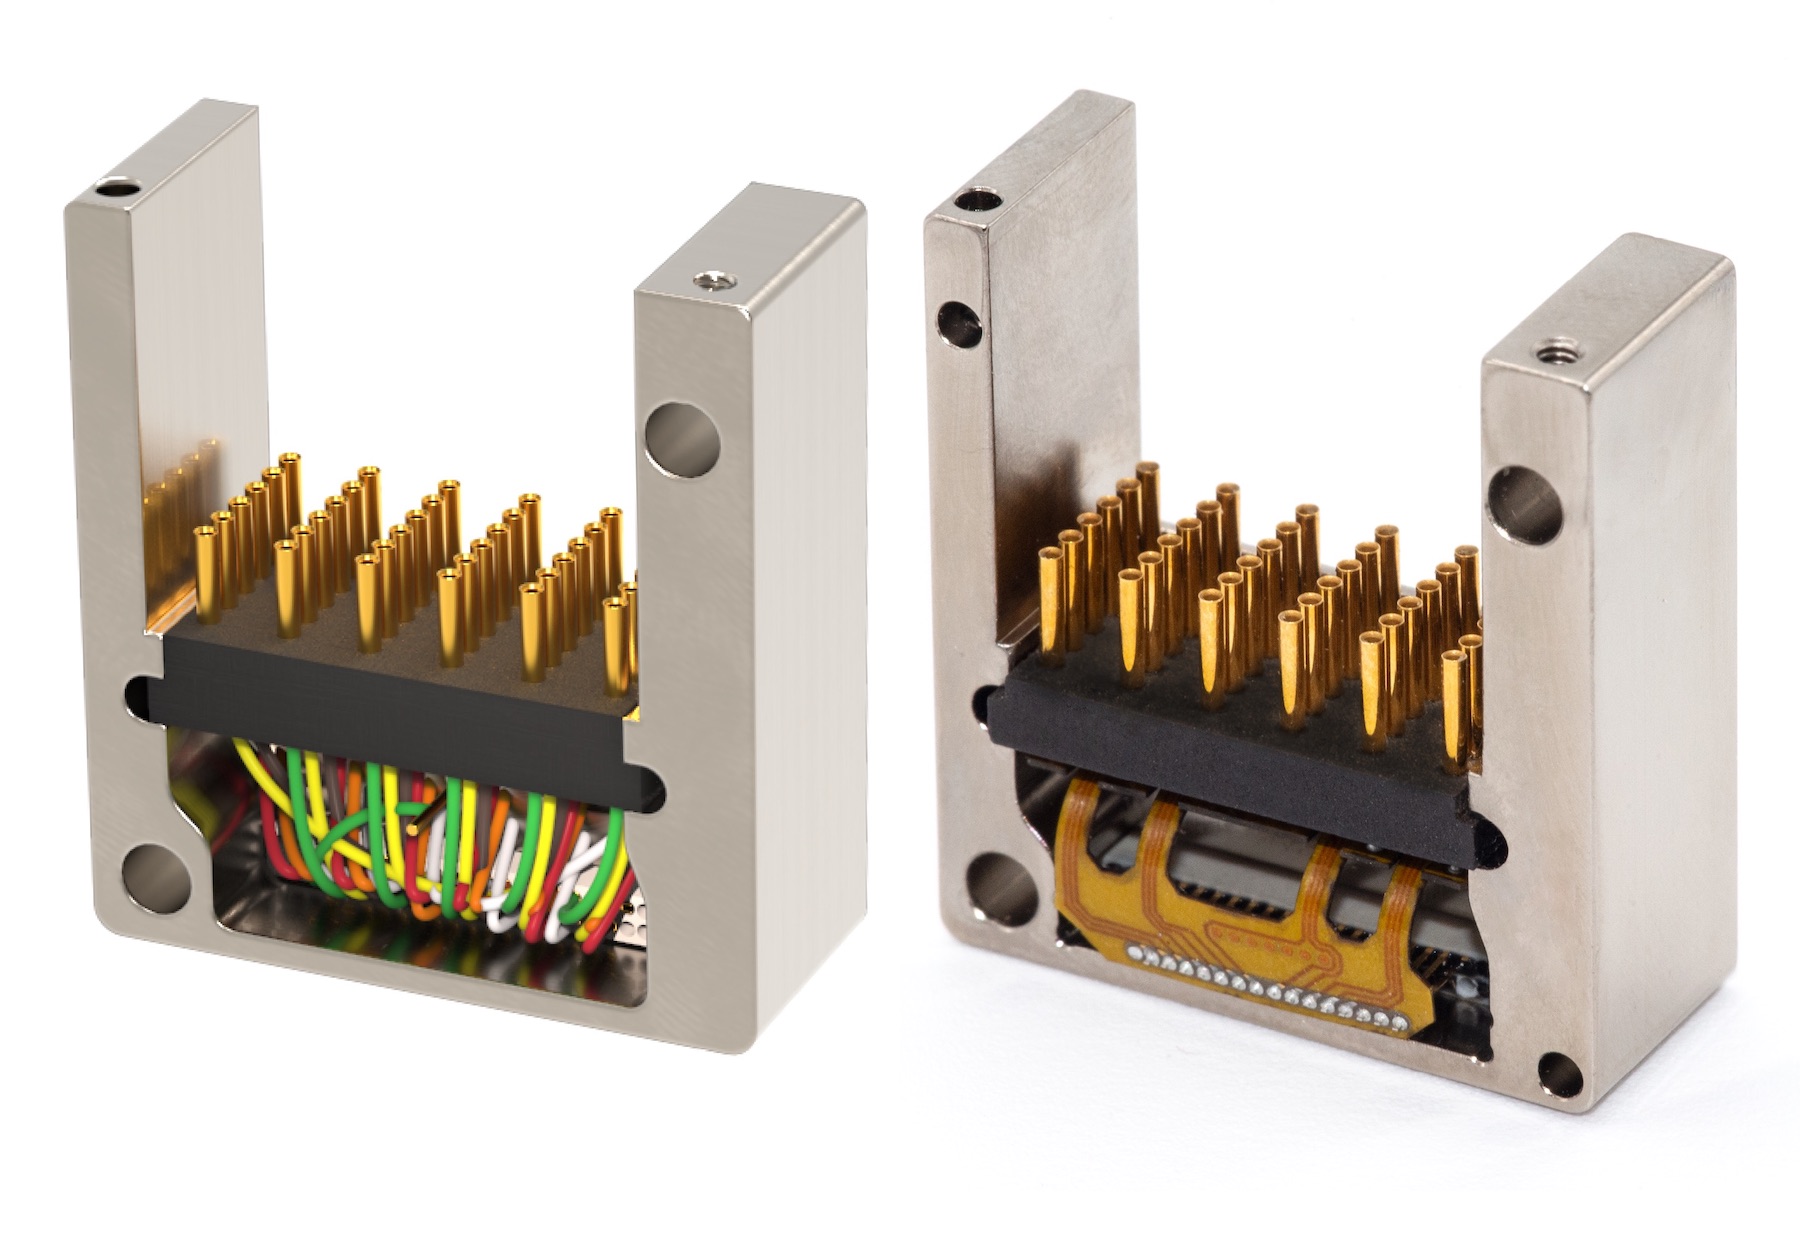 October 2019 Connector Industry News - Omnetics Connector Corporation shared a custom connector design success story in its Fall 2019 e-newsletter